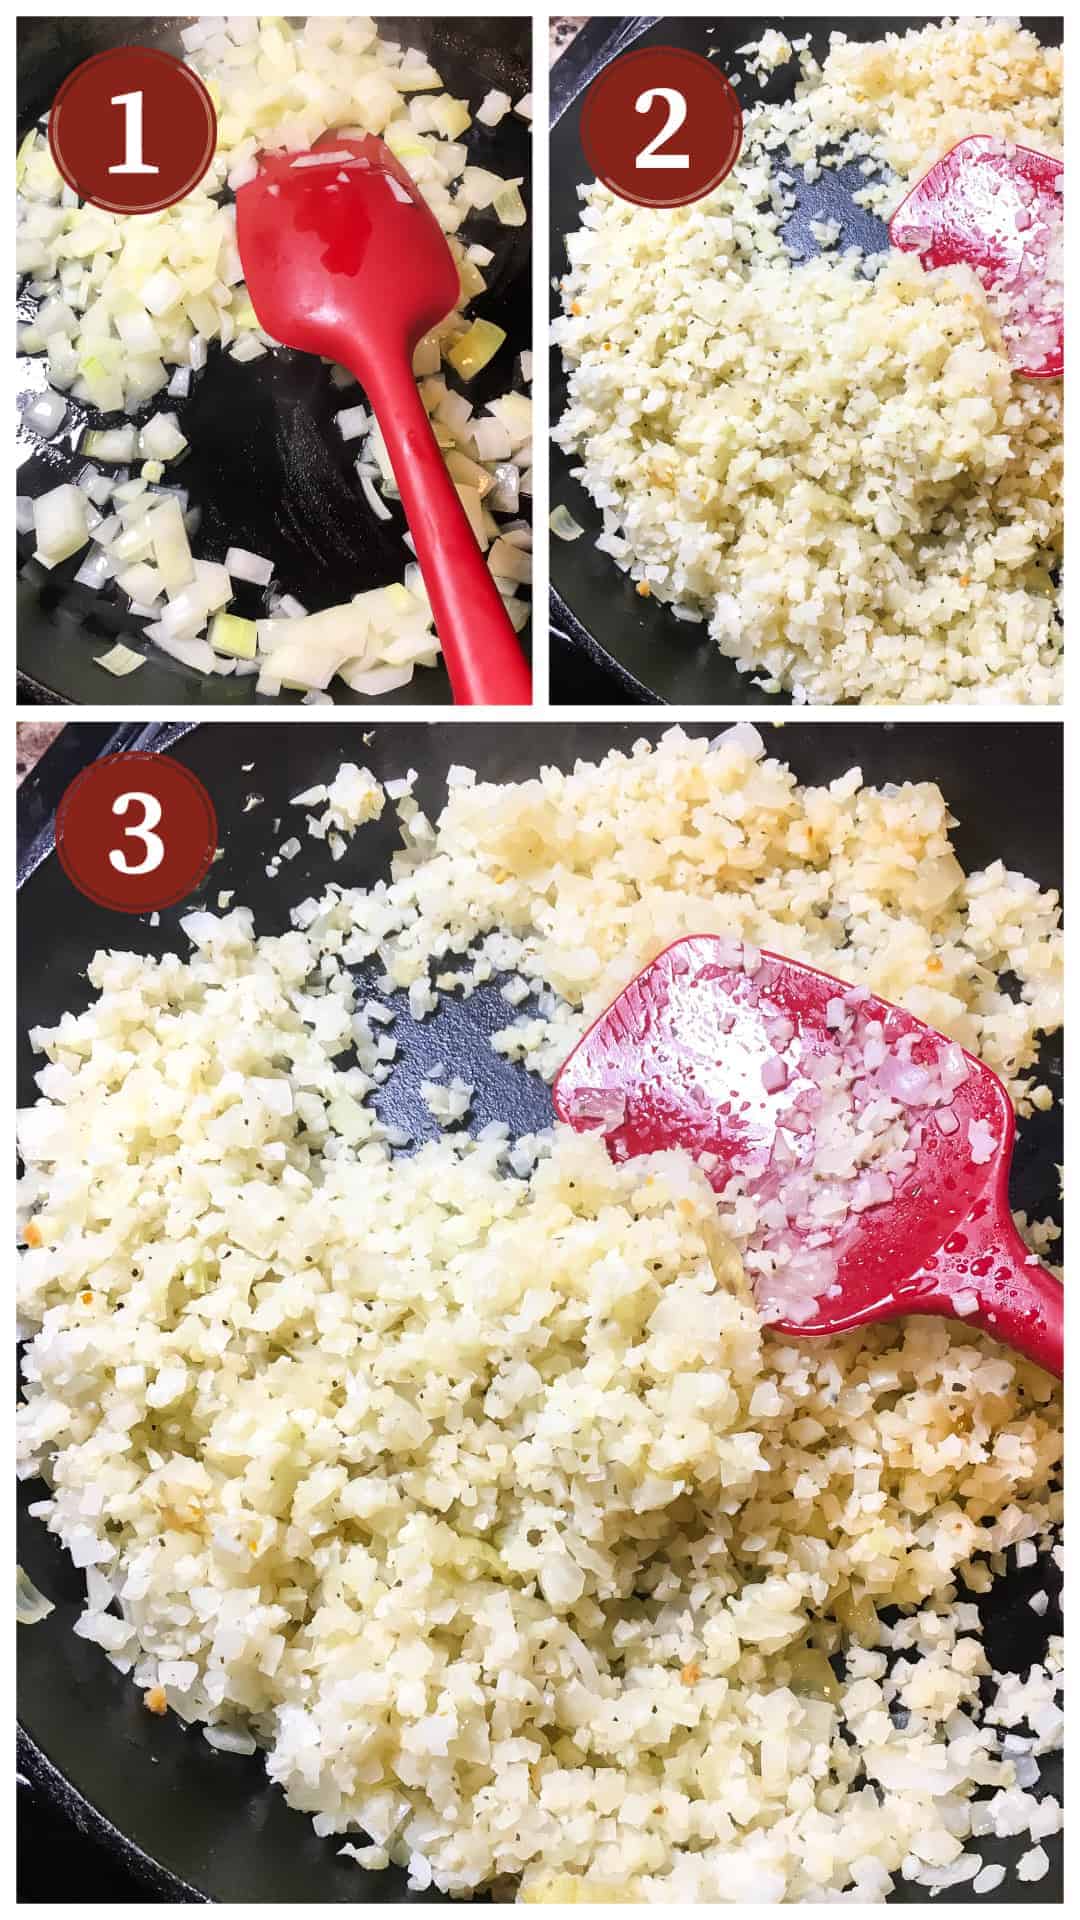 A collage of images showing the process of making cauliflower rice in a cast iron pan.